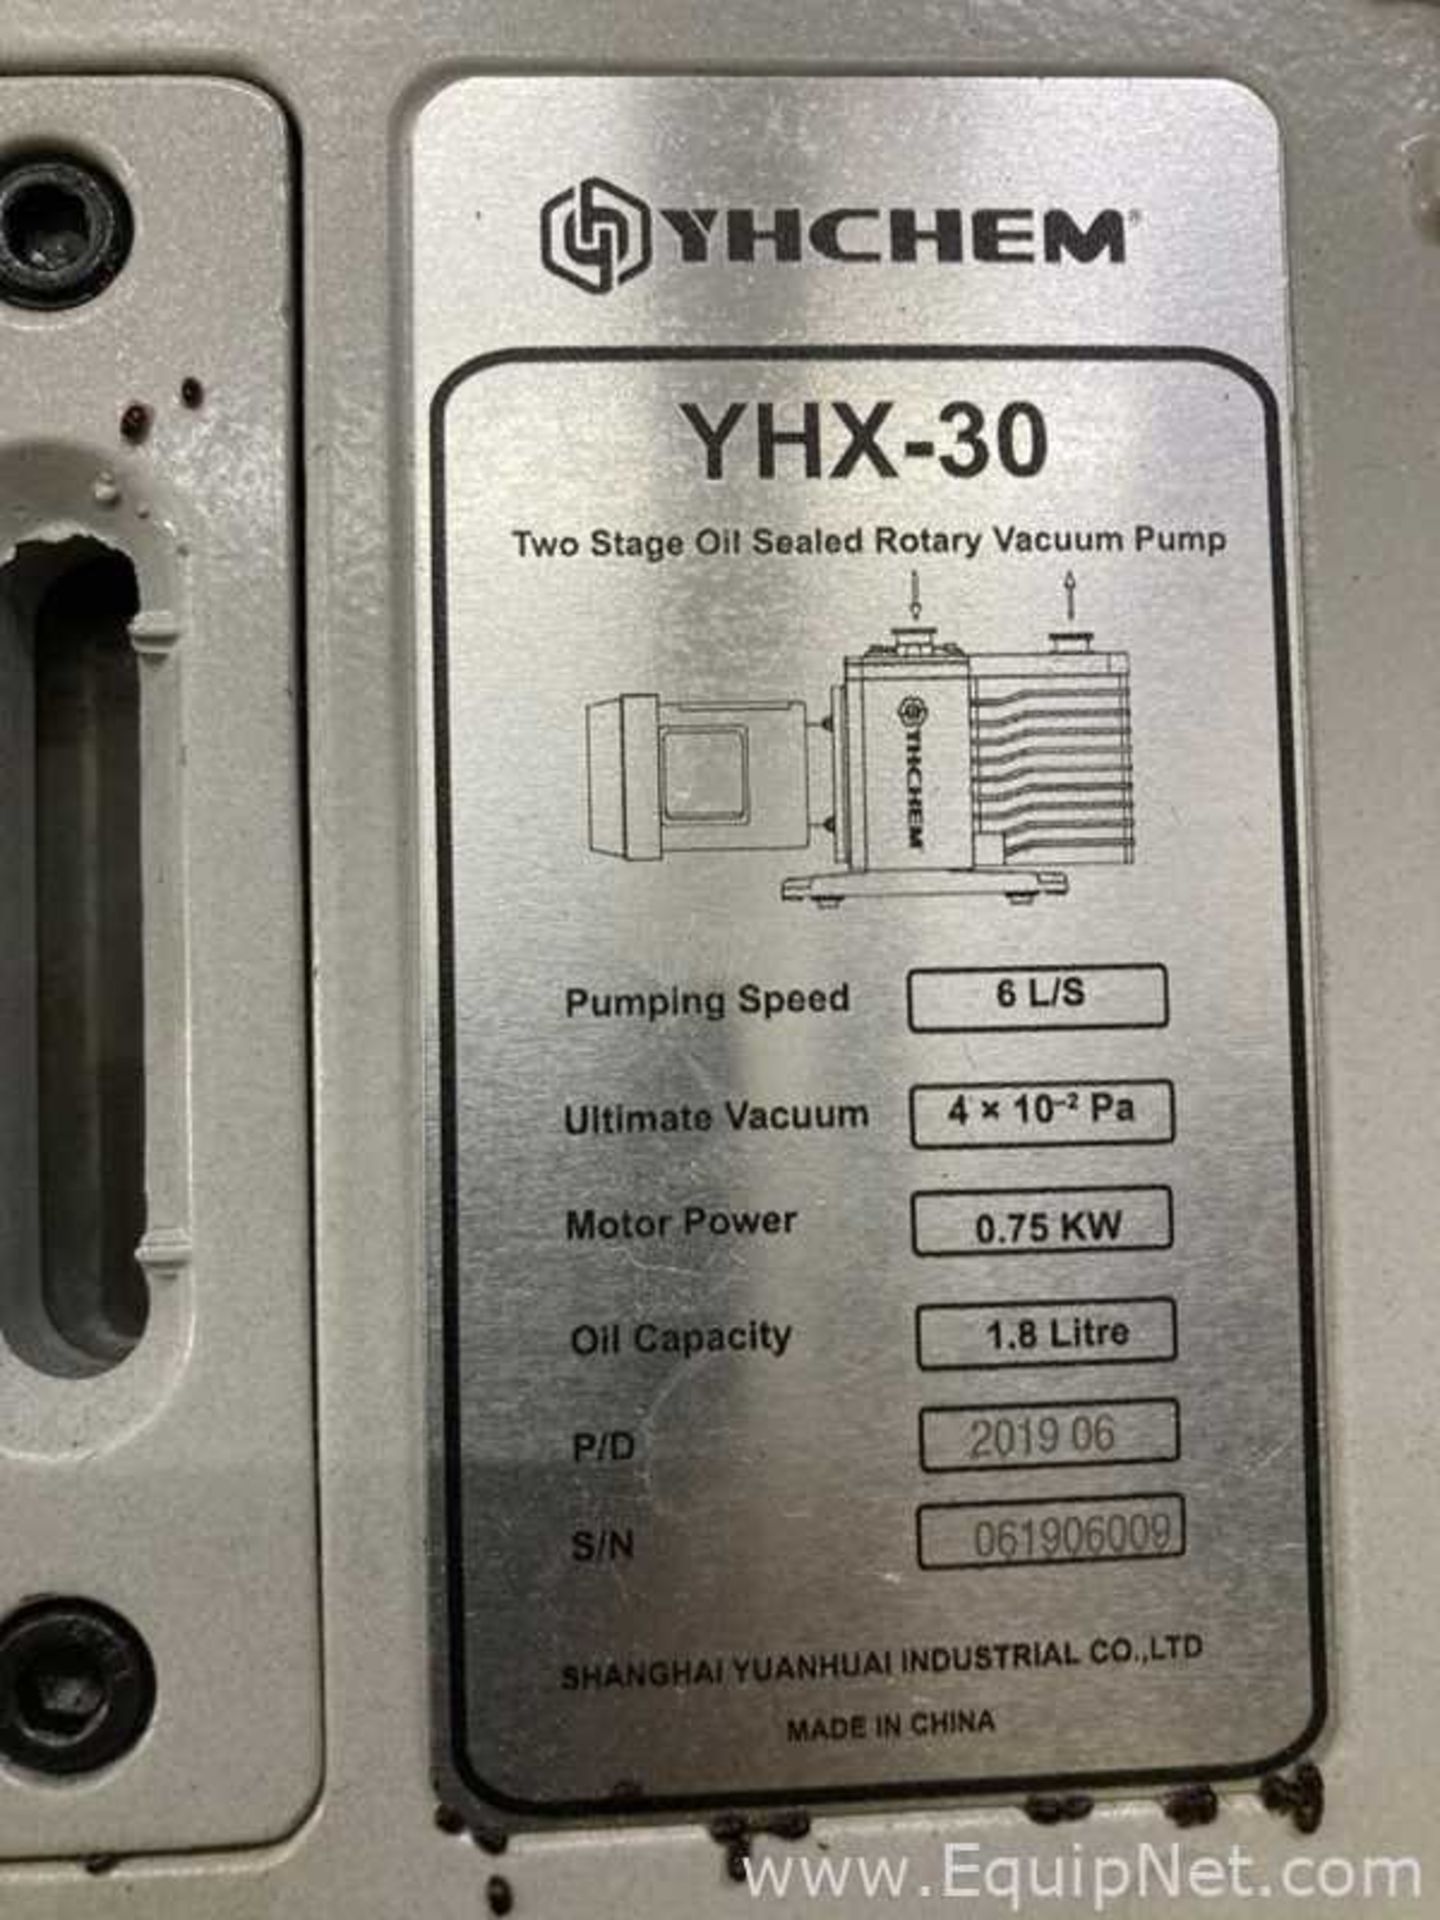 Shanghai Yuanhuai Industrial Co., LTD Yhchem YHX-30 Two Stage Vacuum Pump - Image 6 of 7